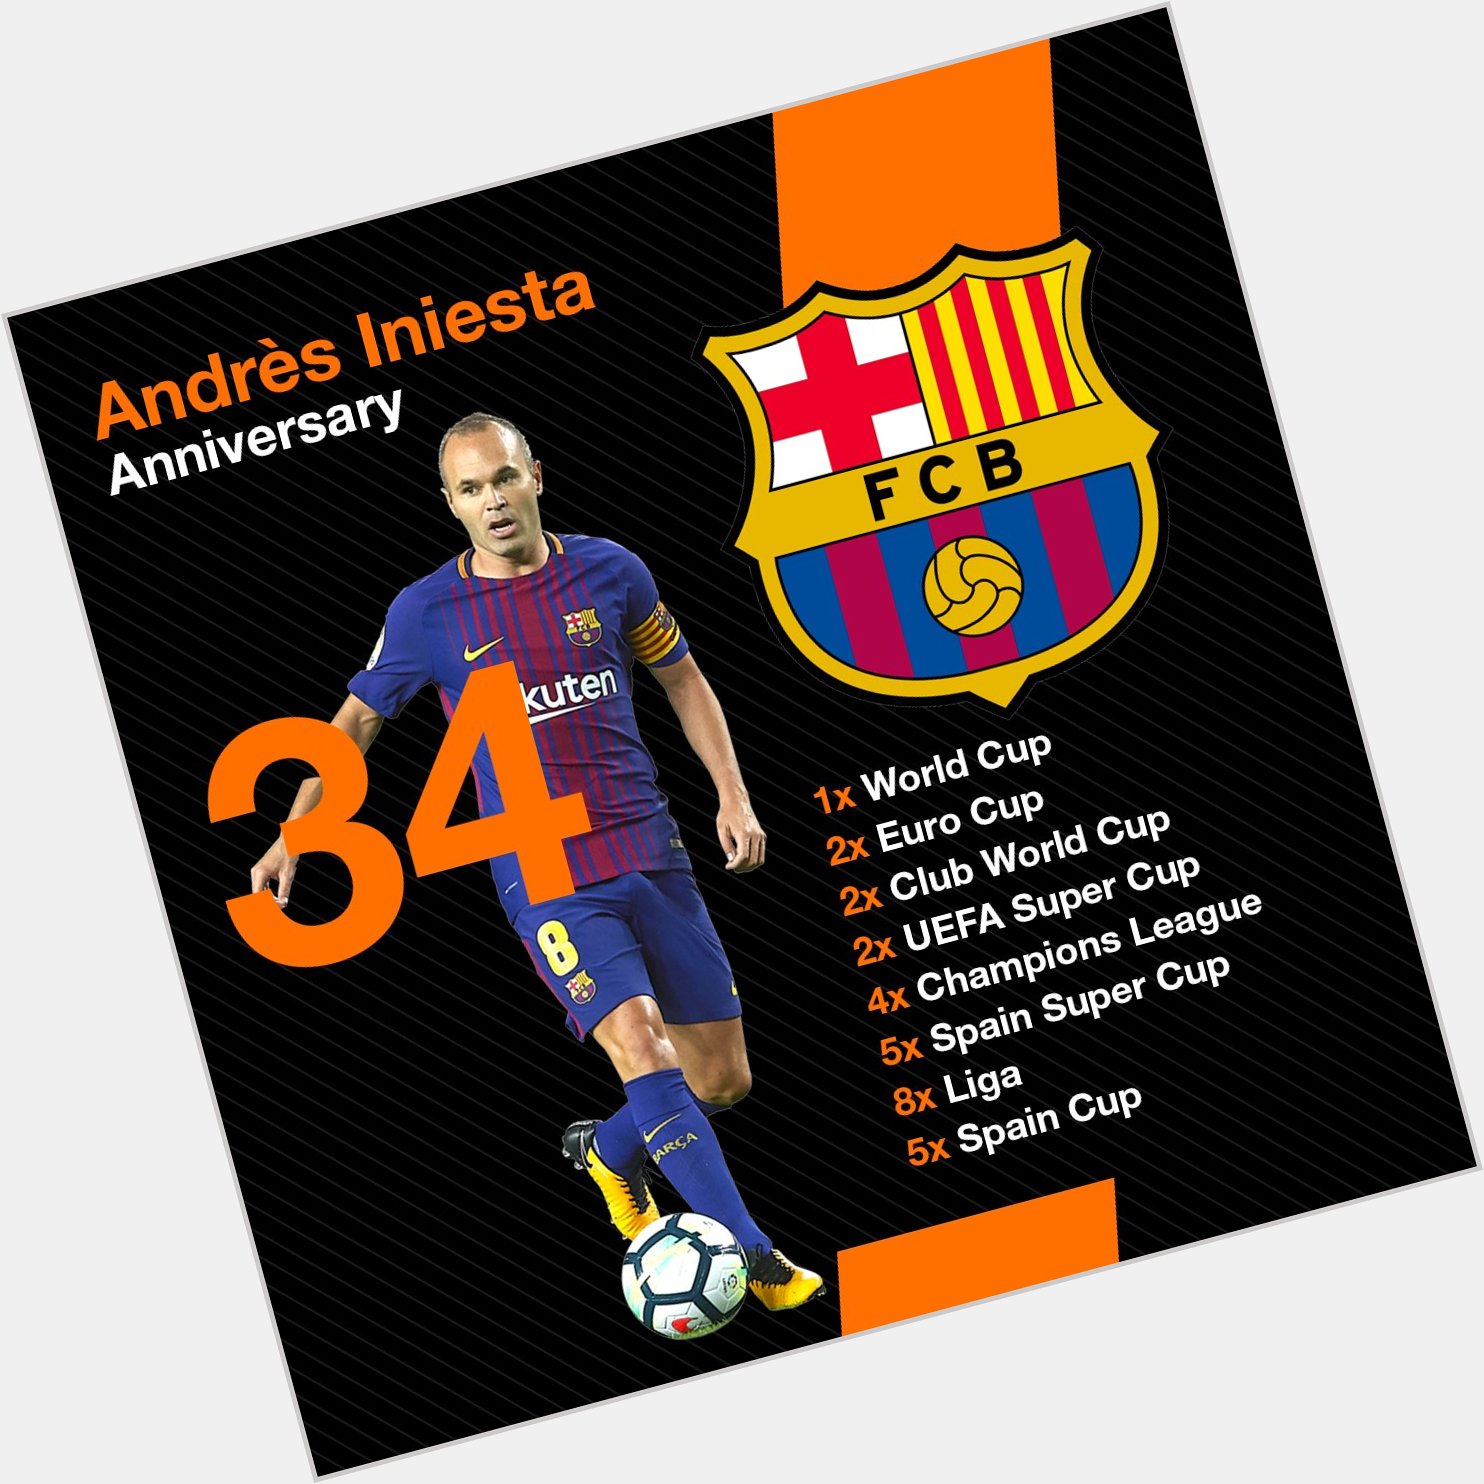 He is only 34 years and has become a football legend. Happy birthday, Andres Iniesta 